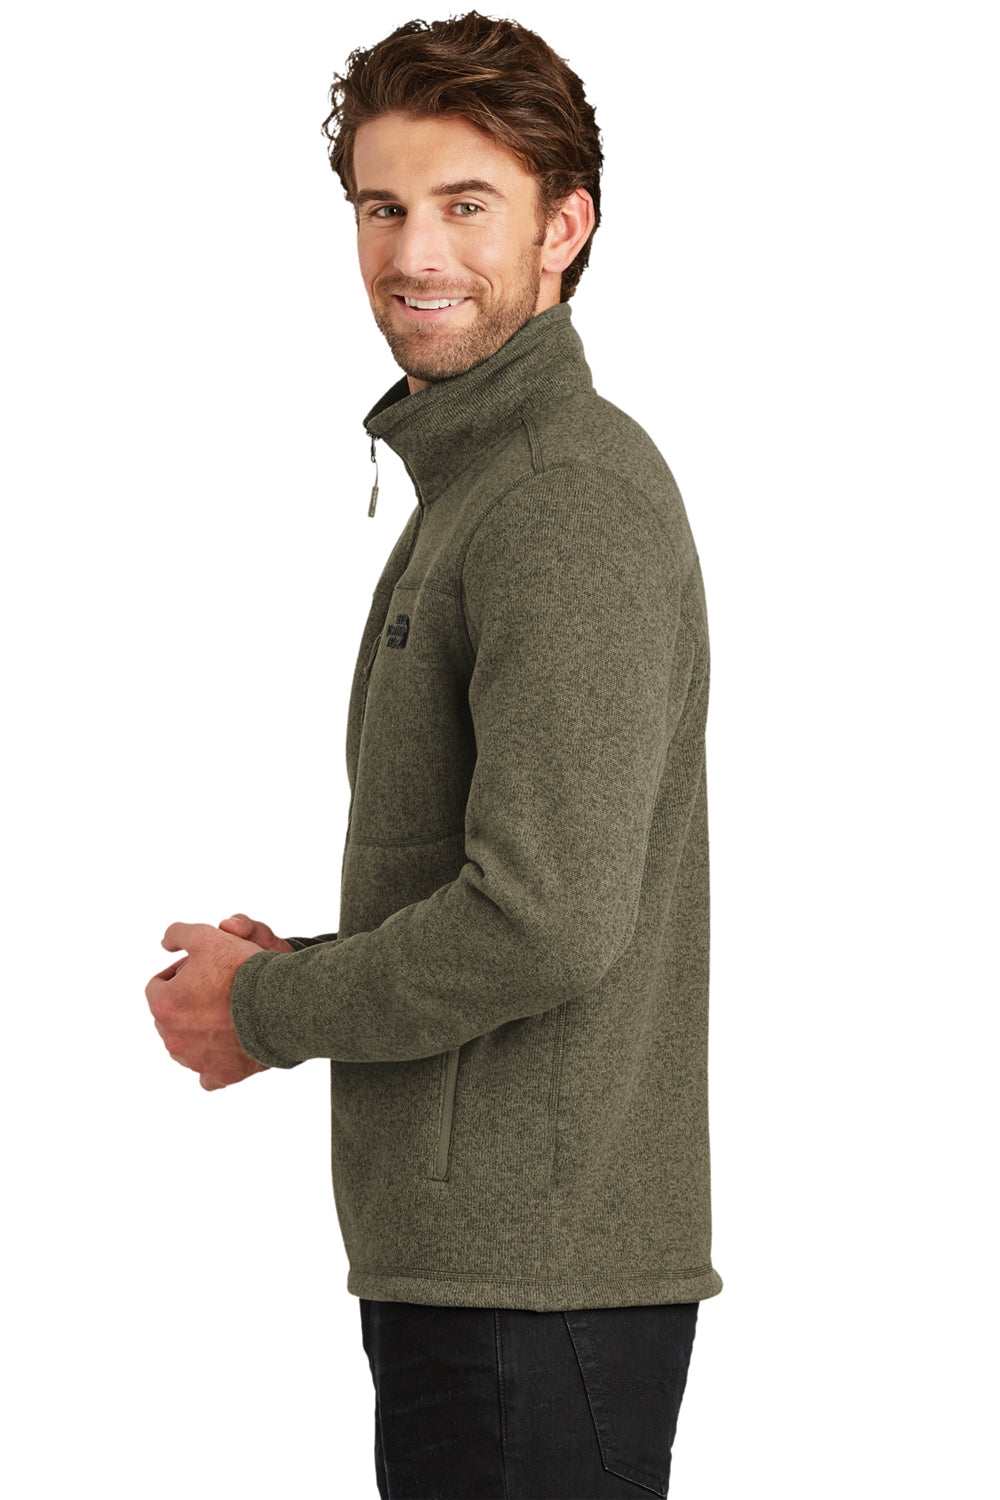 The North Face NF0A3LH7 Mens Full Zip Sweater Fleece Jacket Heather New Taupe Green Side